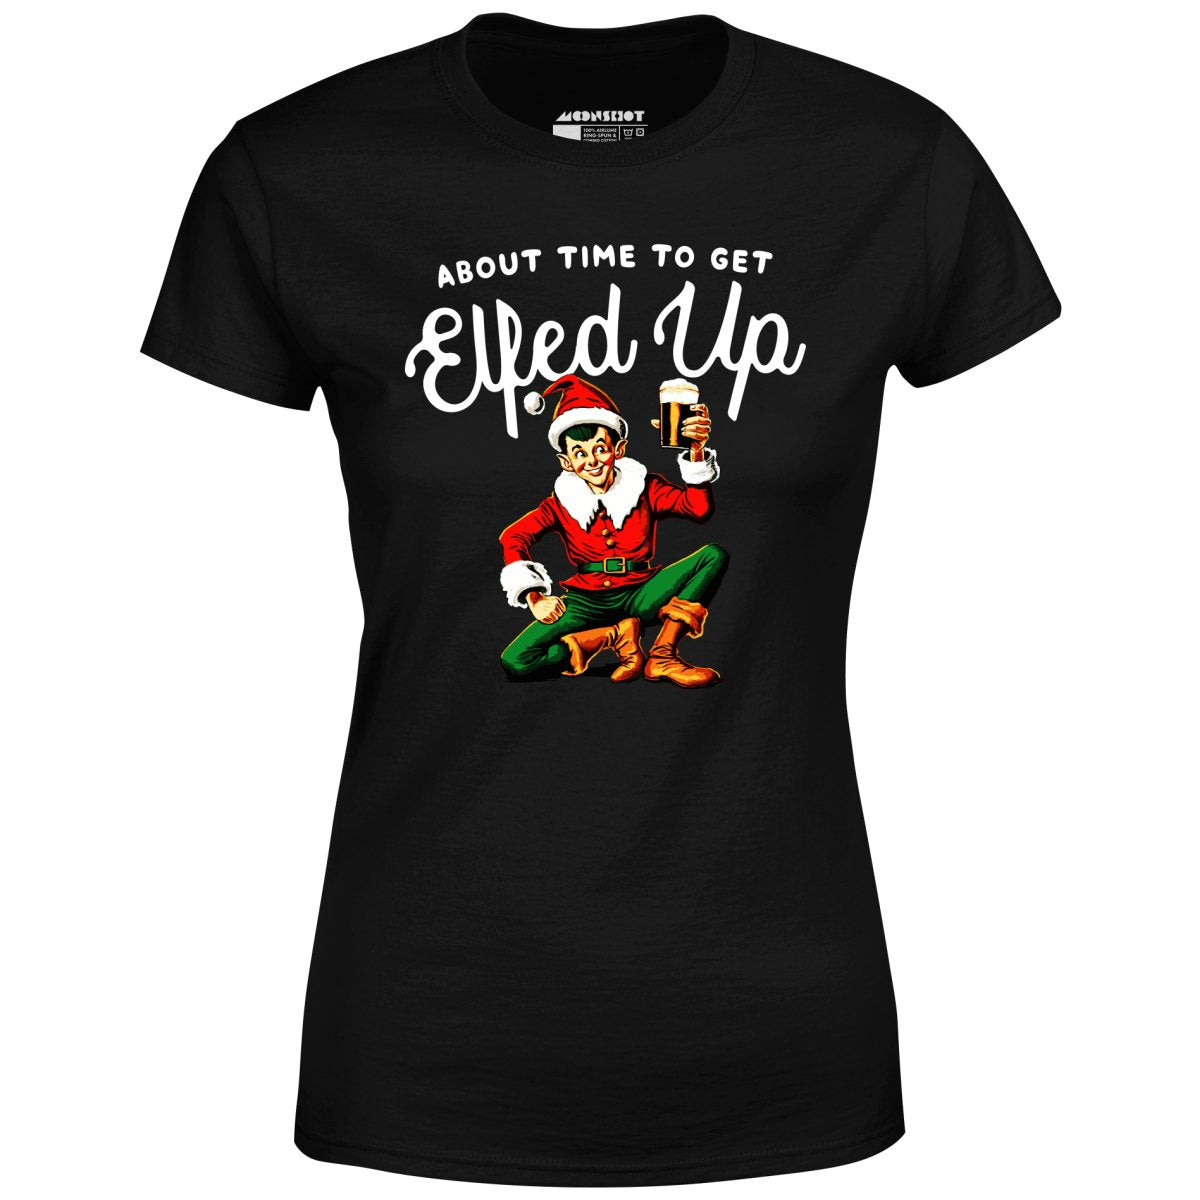 About Time to Get Elfed Up - Women's T-Shirt